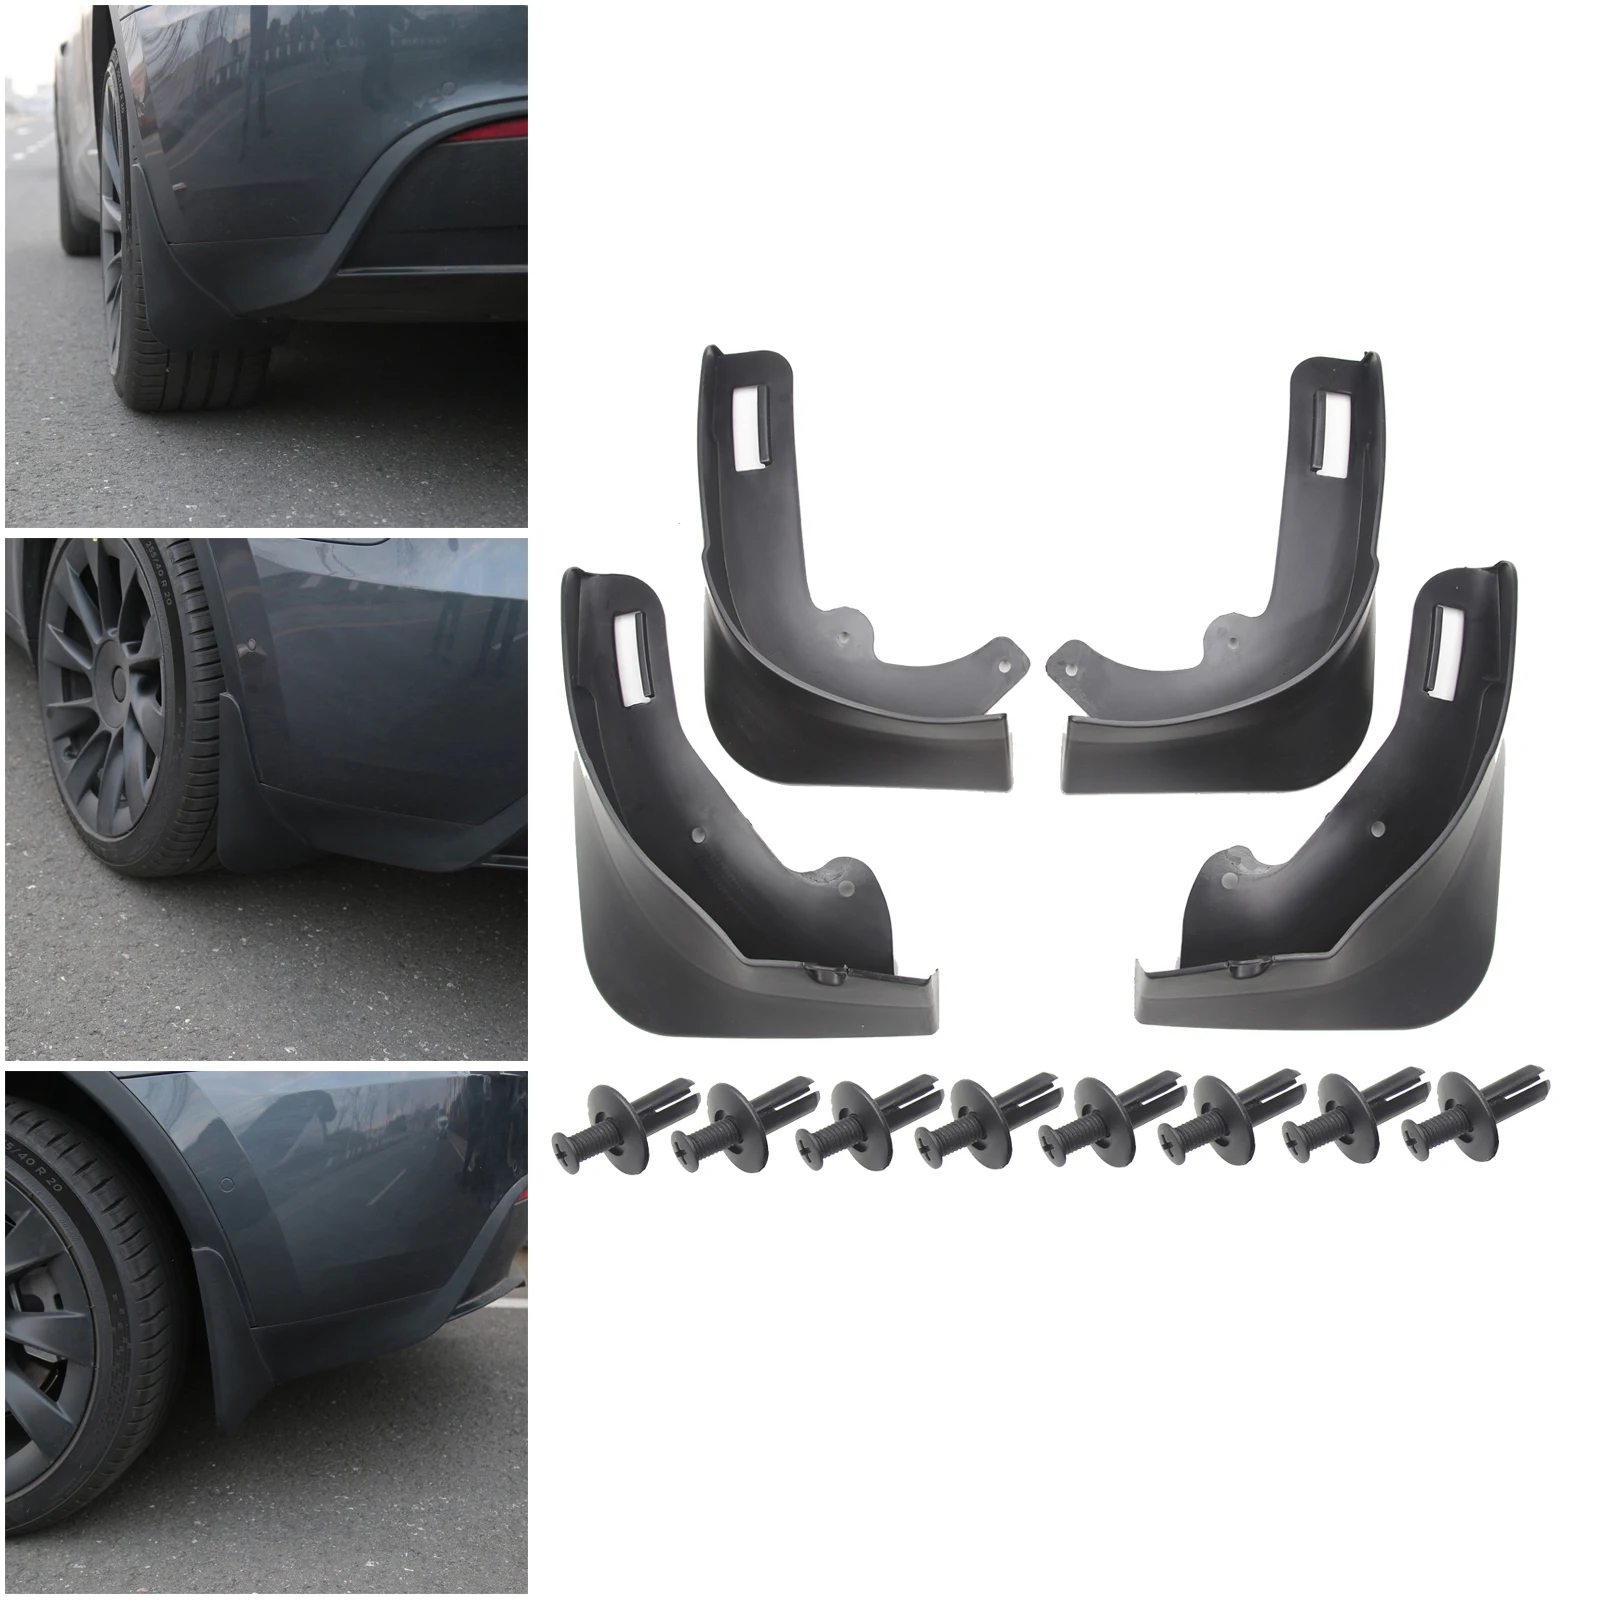 Mud Flaps  Guards  for Tesla Model Y Car Accessories Set of 4